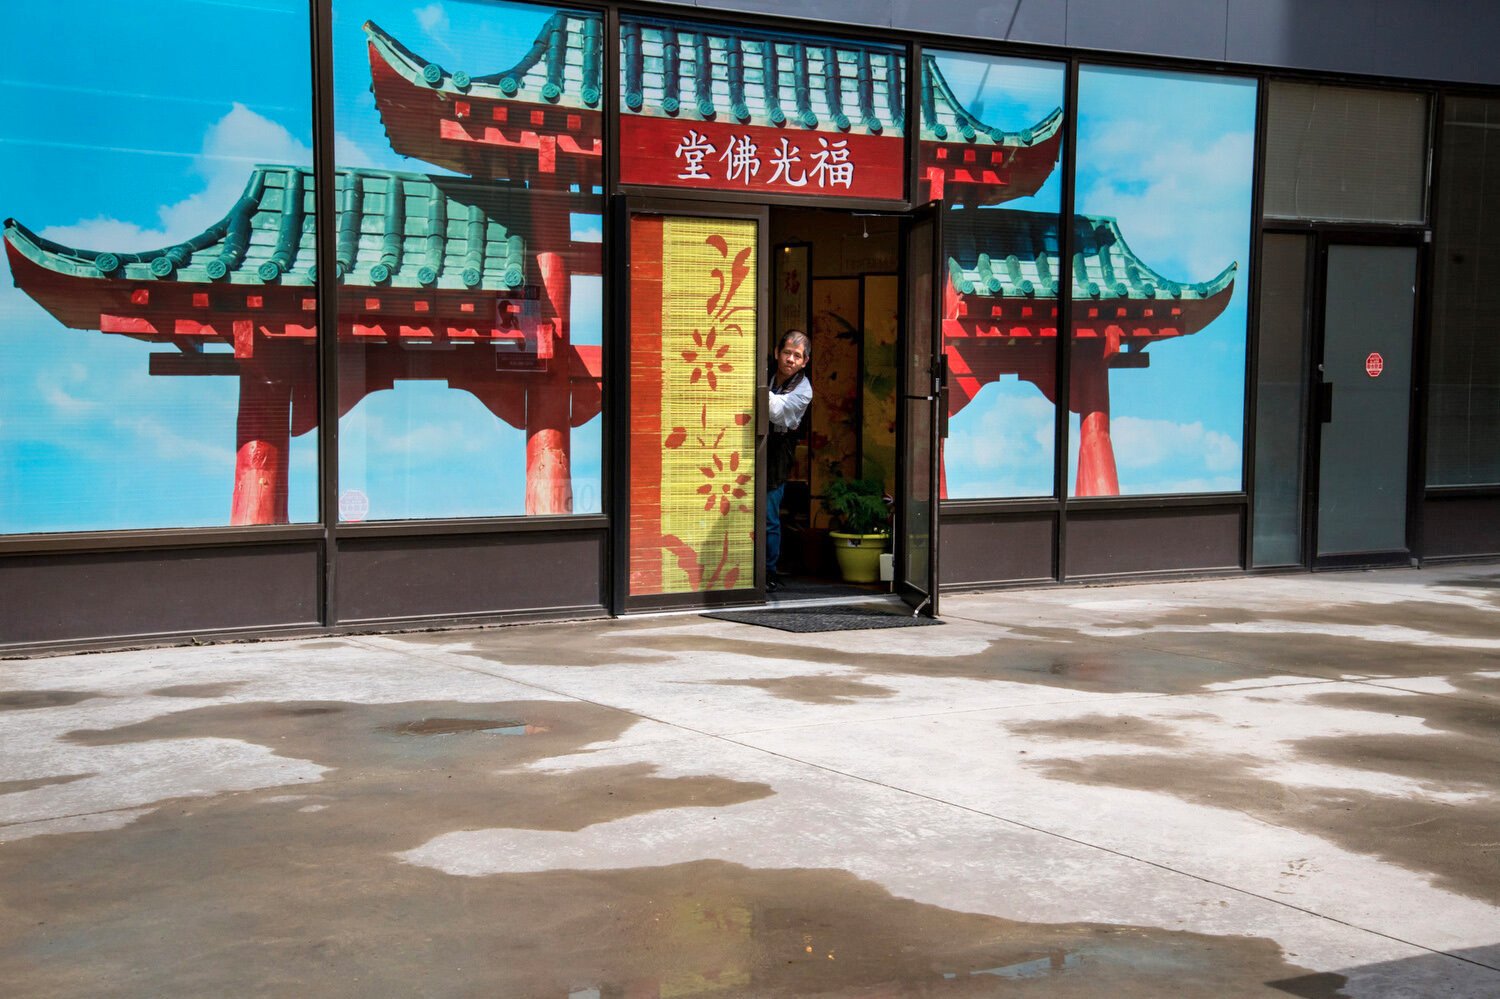  The dispersed Chinese population who can often meet their cultural and religious needs closer to home in the suburbs is one challenge facing Calgary Chinatown today. In 2016 less than 2% of the city’s total Chinese population lived in Chinatown. 